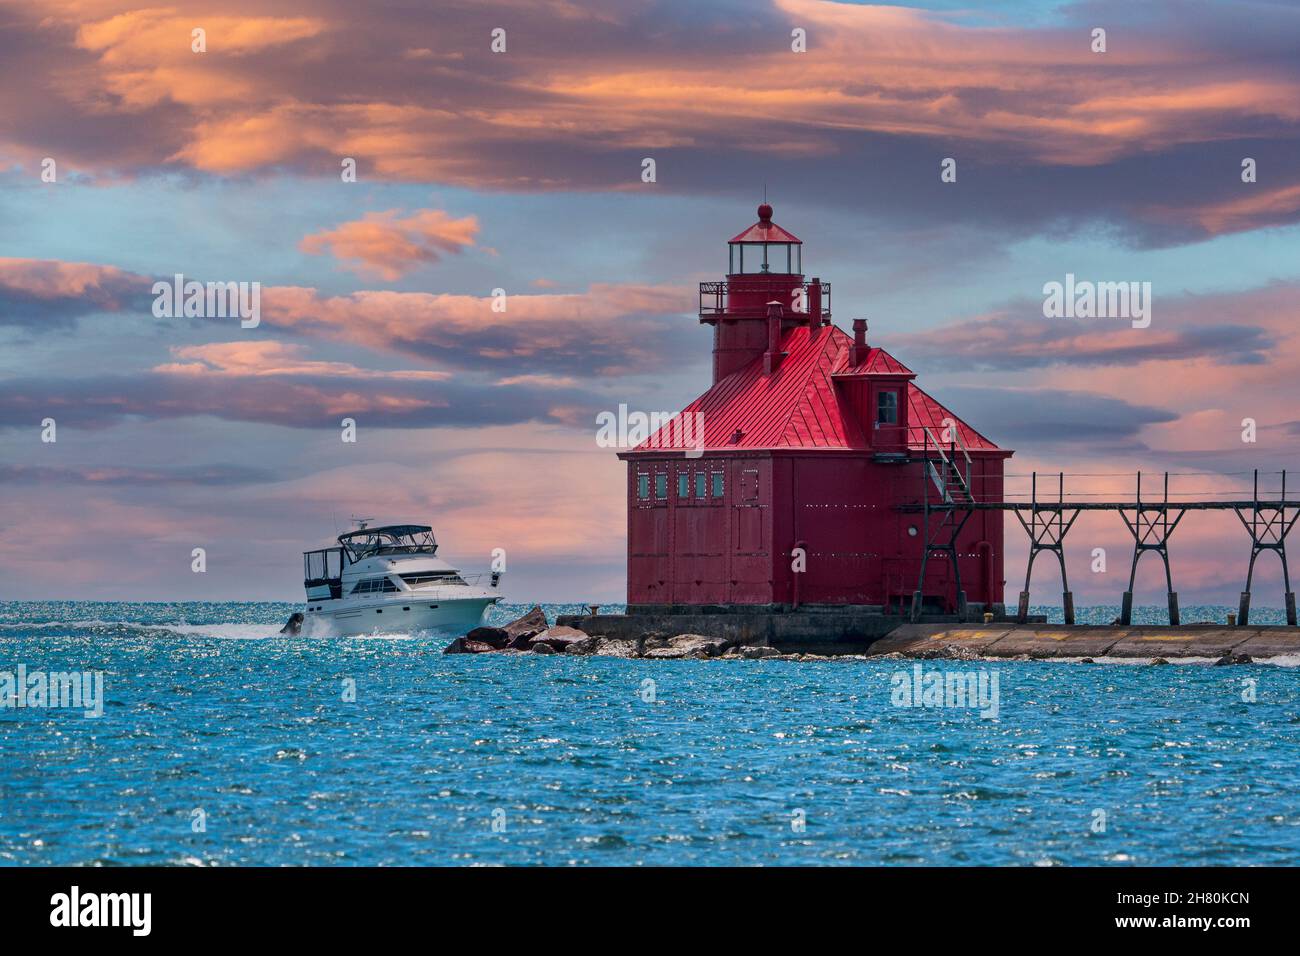 This is the Coast Guard lighthouse and breakwall at the east entrance to the Sturgeon Bay hipping canal that connects Green Bay to Lake Michigan in Wi Stock Photo